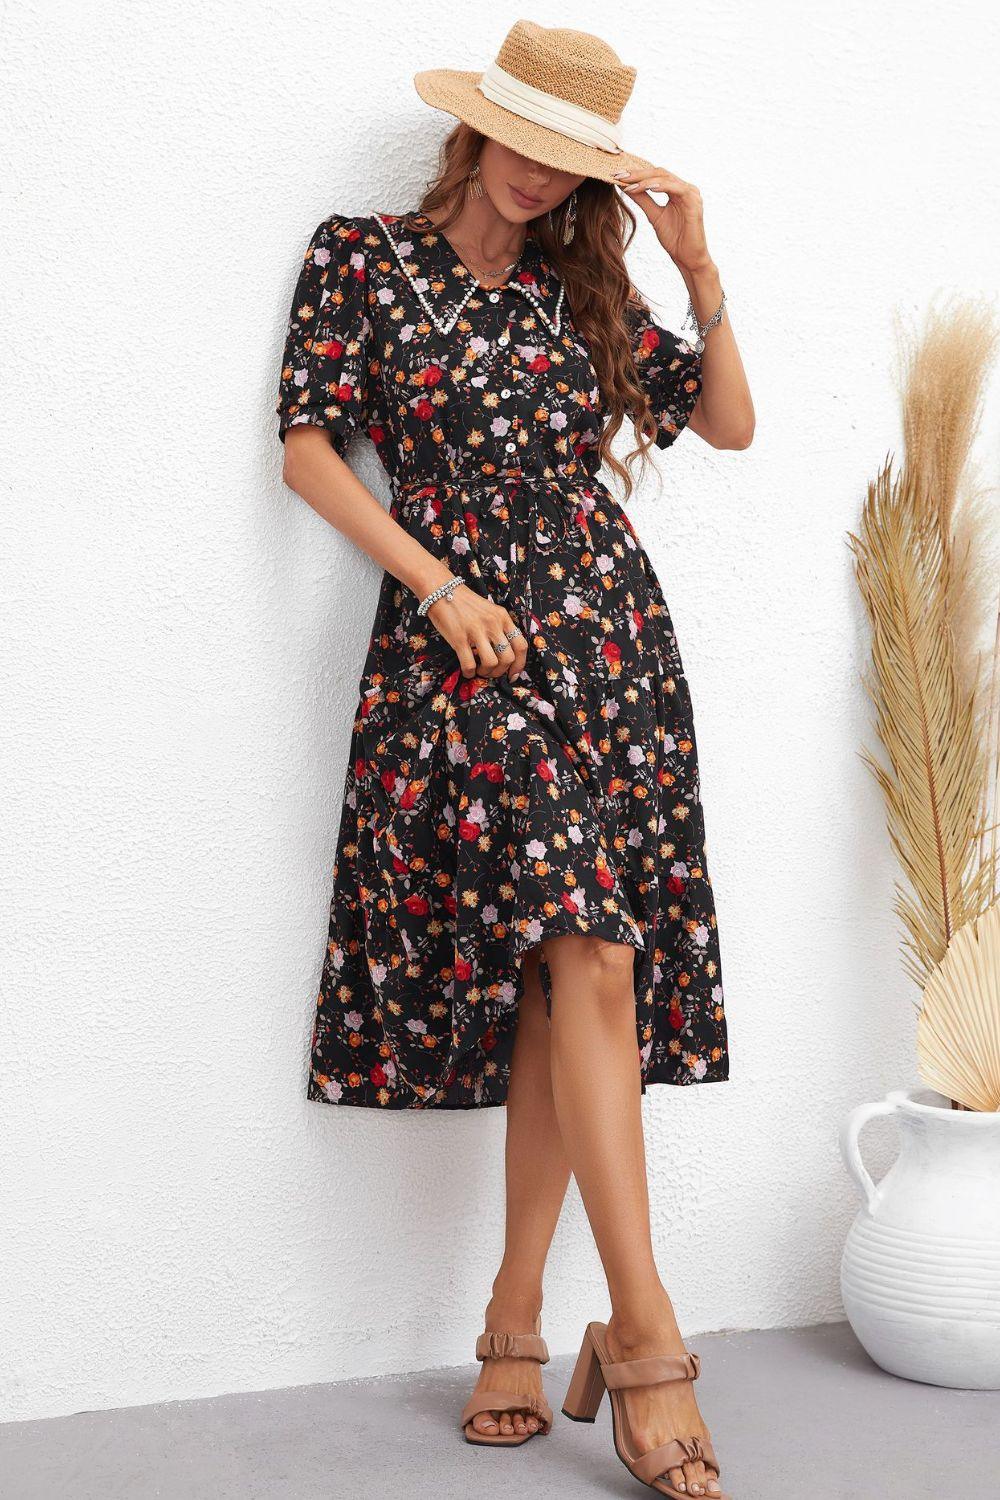 Floral Collared Neck Puff Sleeve Dress